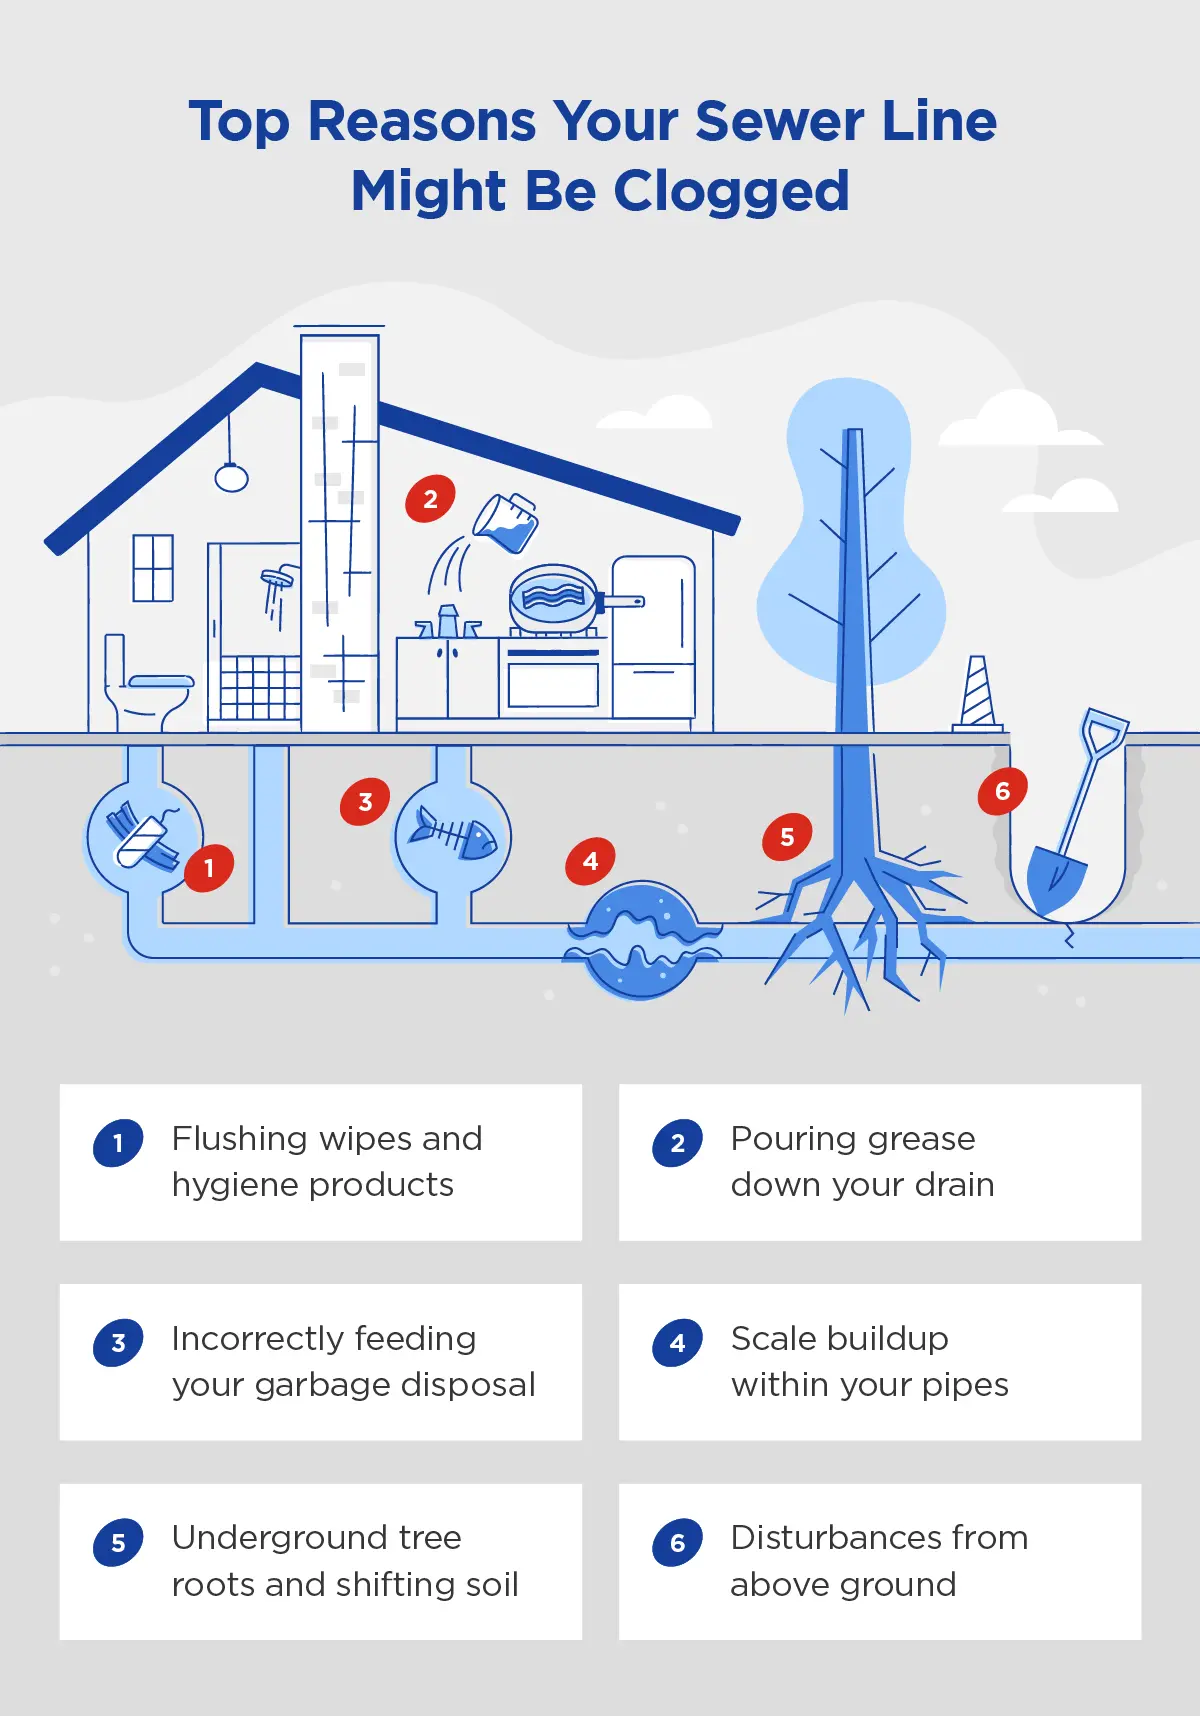 Illustration highlighting the top reasons your sewer line might be clogged.